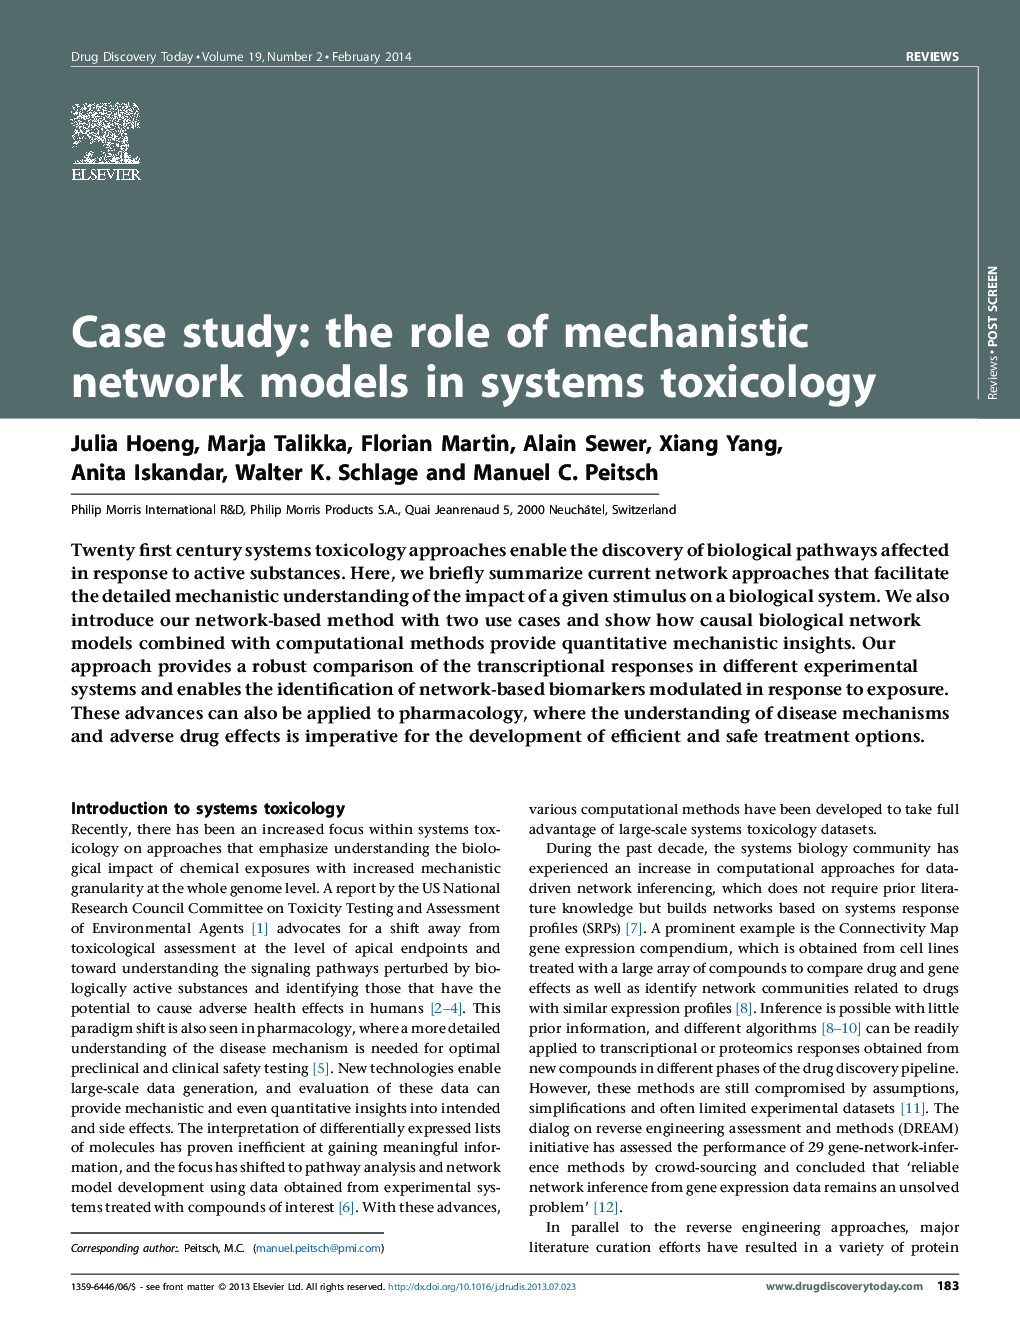 Case study: the role of mechanistic network models in systems toxicology